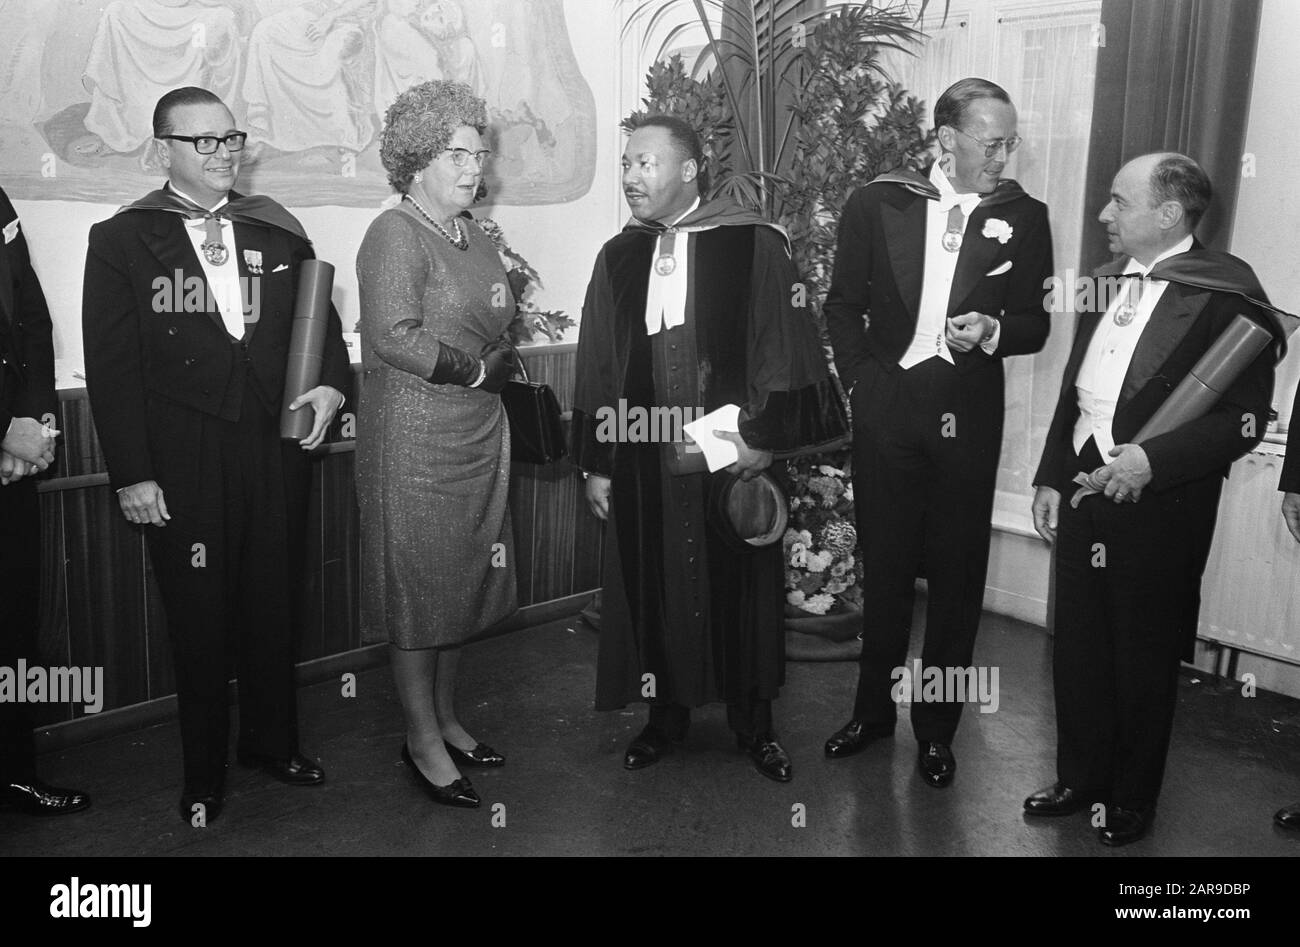 Honorary doctorates of the VU University in the Concertgebouw in Amsterdam  V.l.n.r. Minister-President of the Antilles E. Jonckheer, Queen Juliana, Dr. Martin Luther King and Prince Bernhard Date: 20 October 1965 Location: Amsterdam, Noord-Holland Keywords: honorary doctorates, queens, prime ministers, ceremonies Personal name: Bernhard (prince Netherlands), Jonckheer, E., Juliana (queen Netherlands), King, Martin Luther Stock Photo